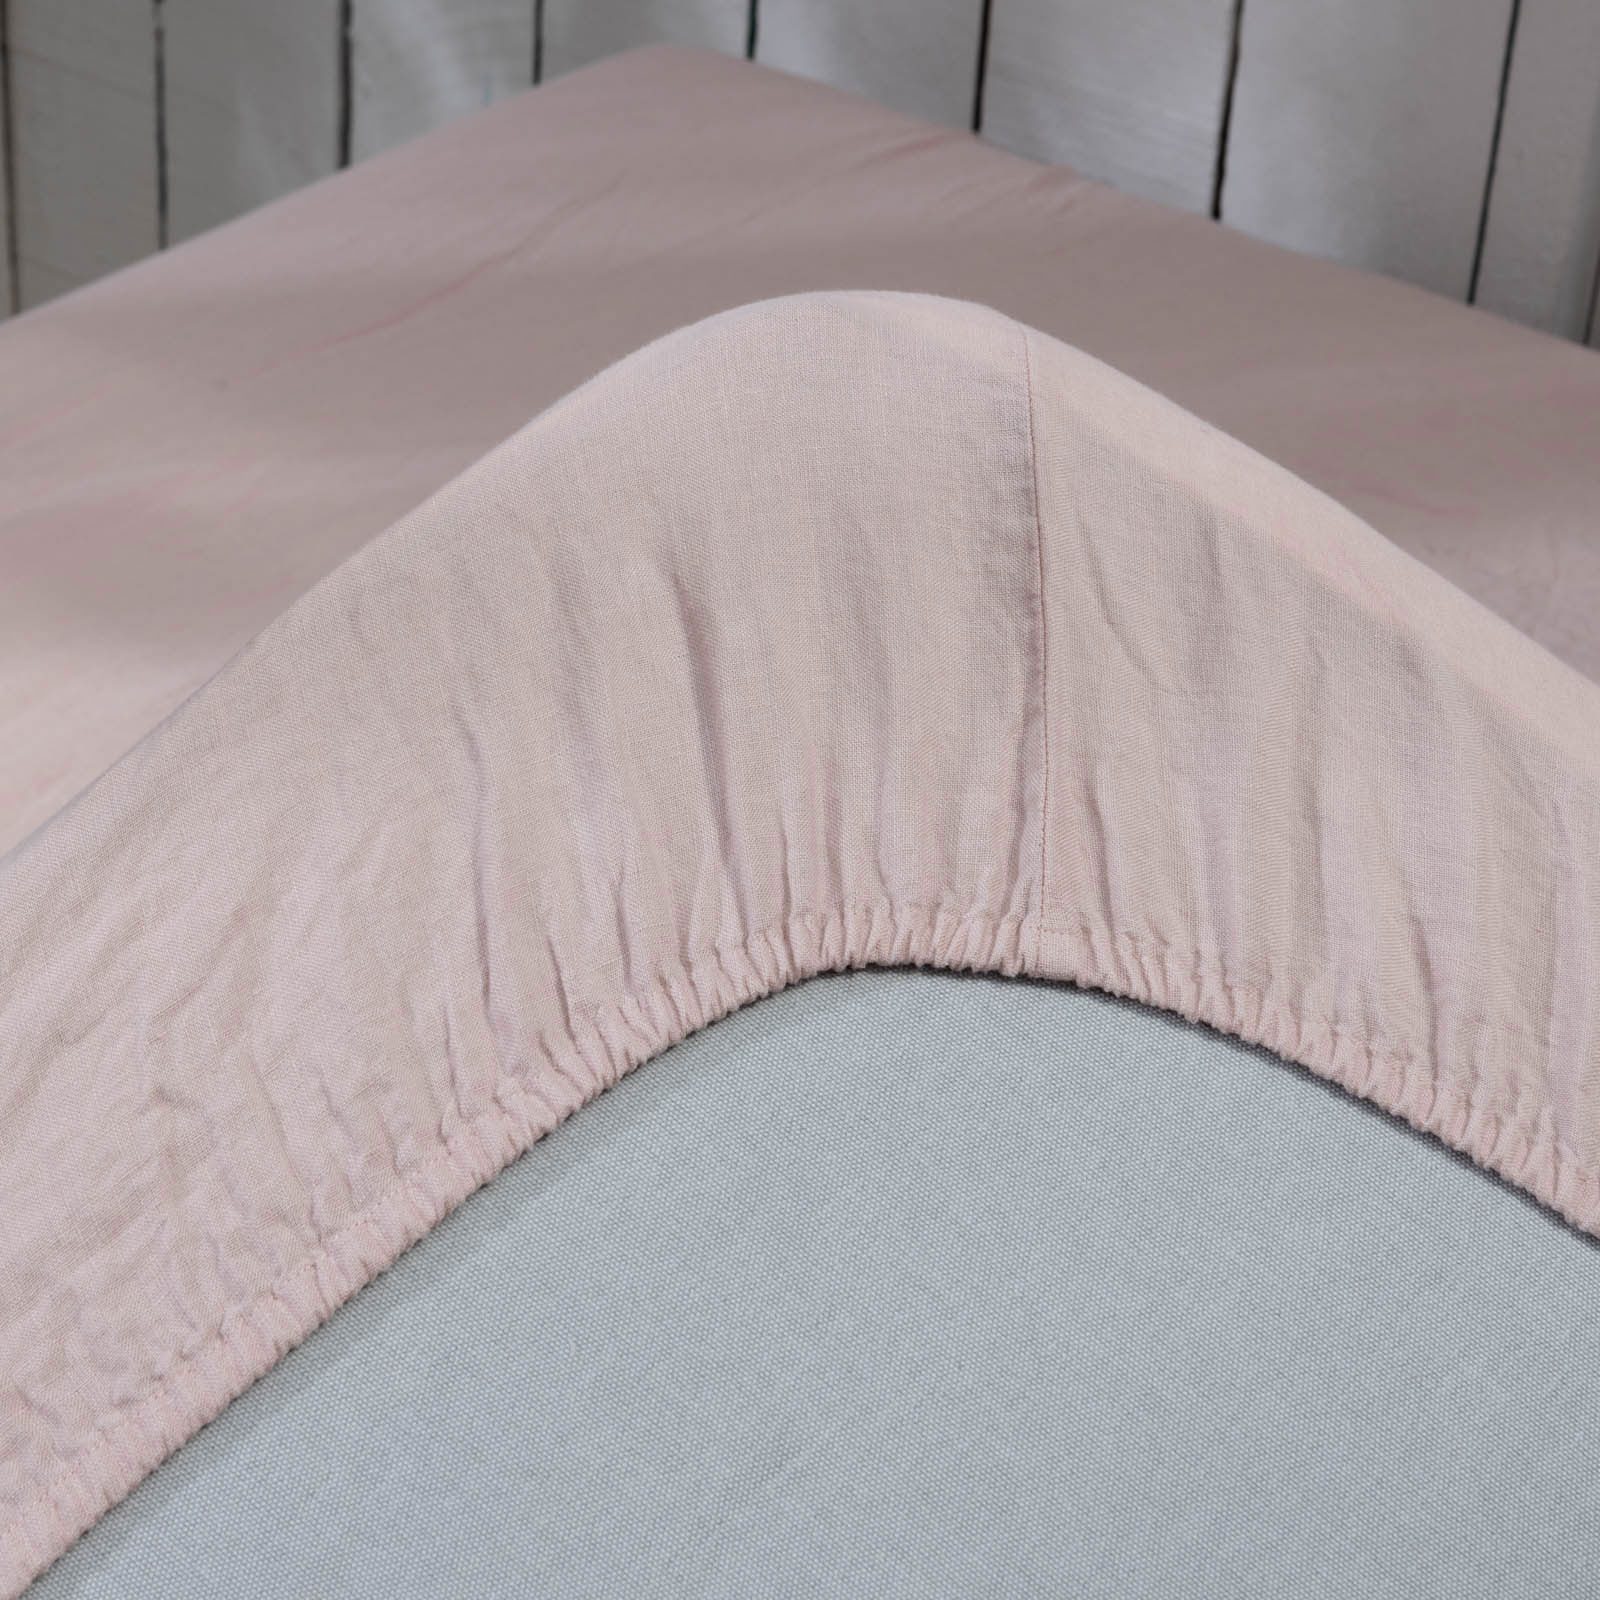 stone-washed-linen-fitted-sheet-powder-pink-2